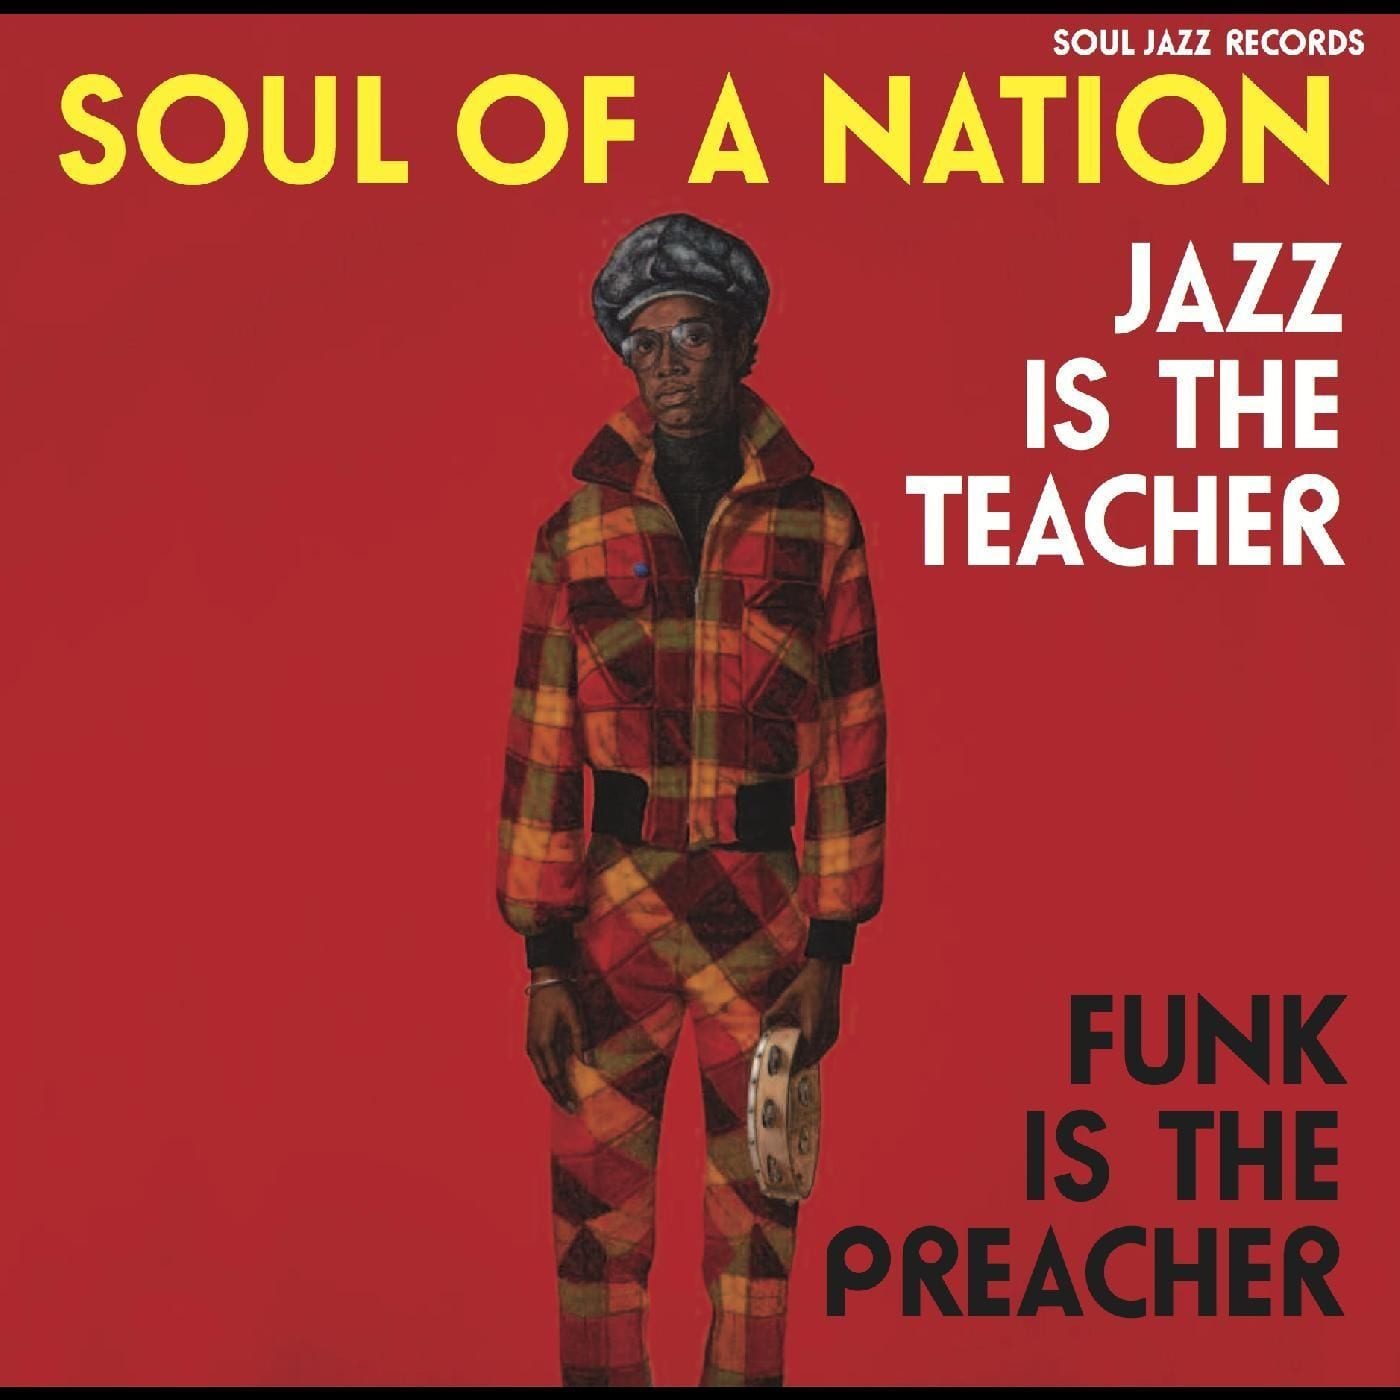 ‘Jazz Is the Teacher, Funk Is the Preacher’ Continues the Connection Between Black Power-era Art and Progressive Jazz and Funk